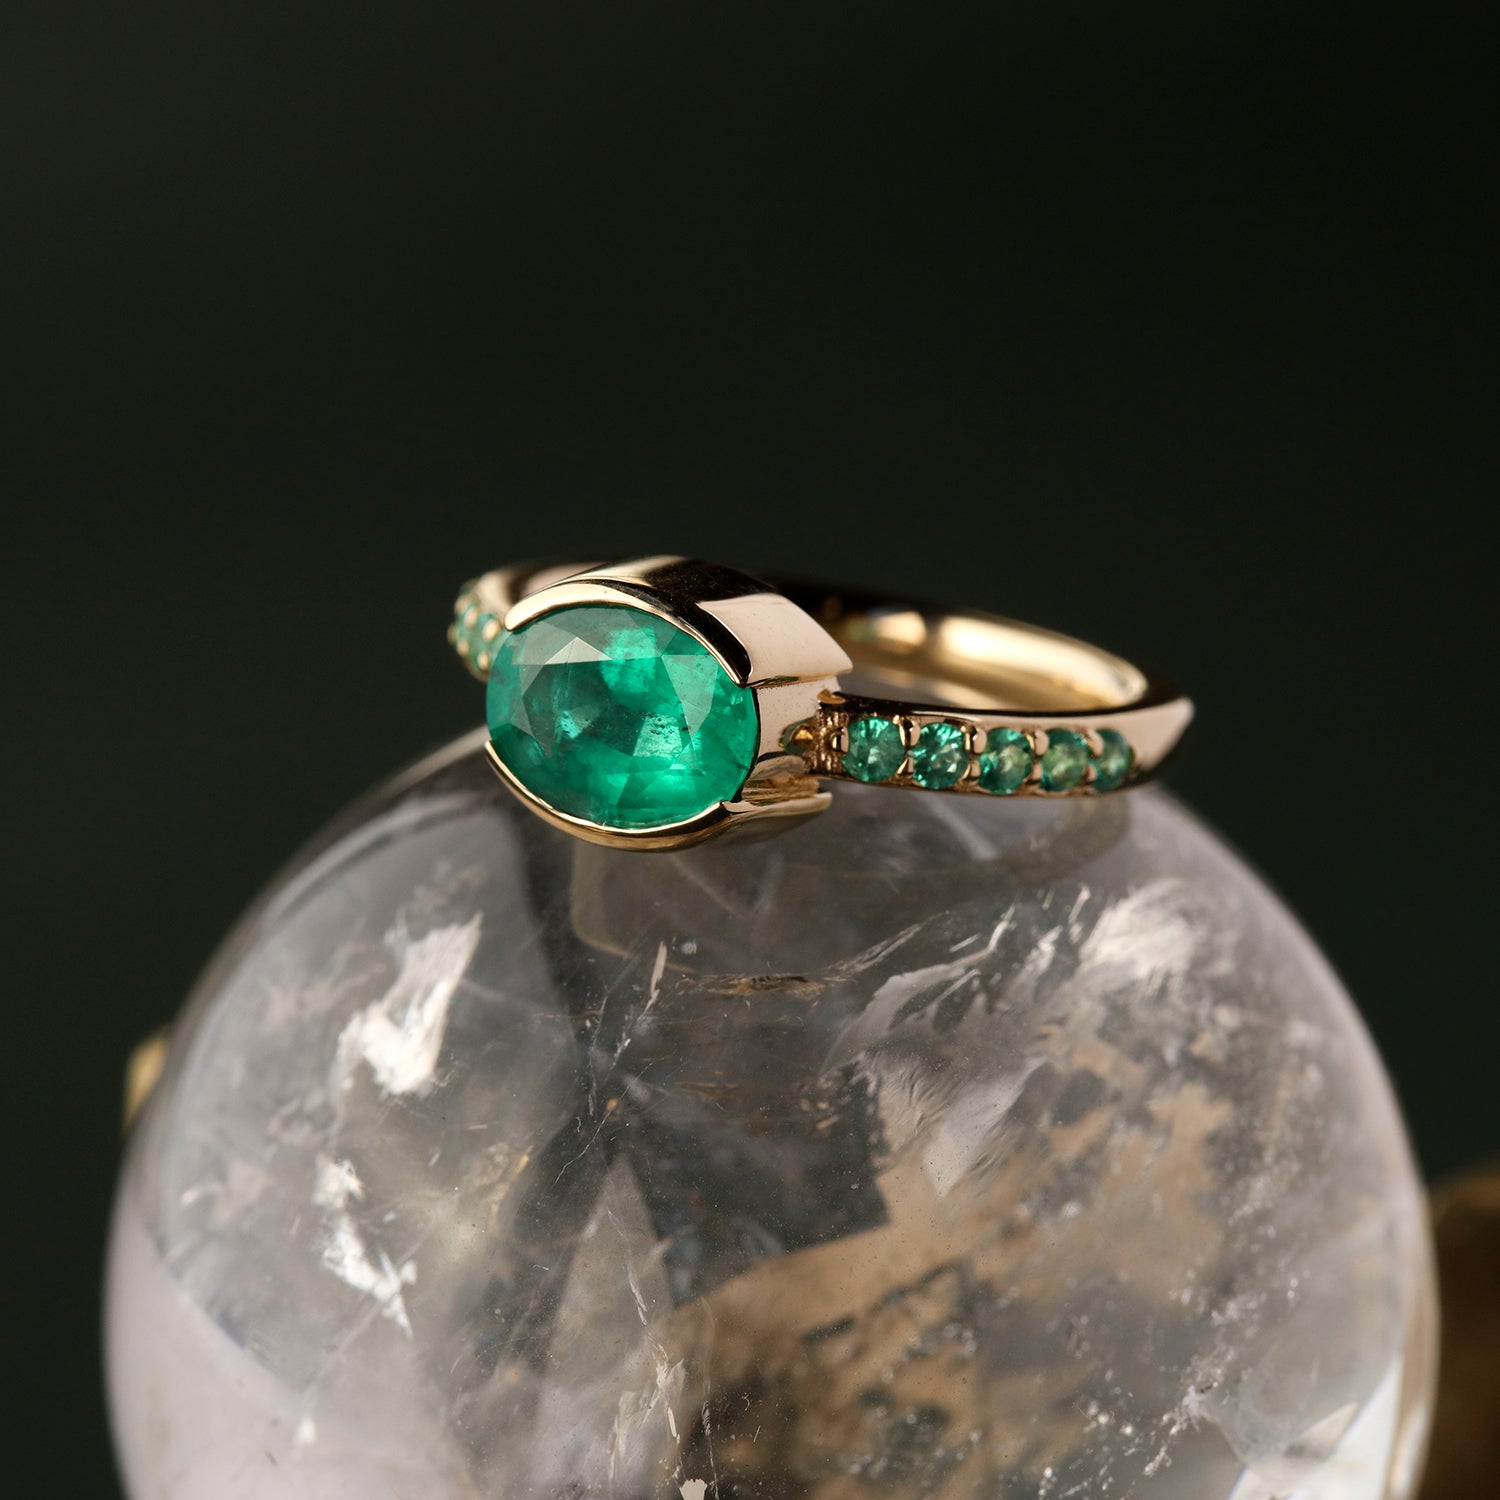 midheaven collection statement ring Mare Nubium Emerald engagement ring